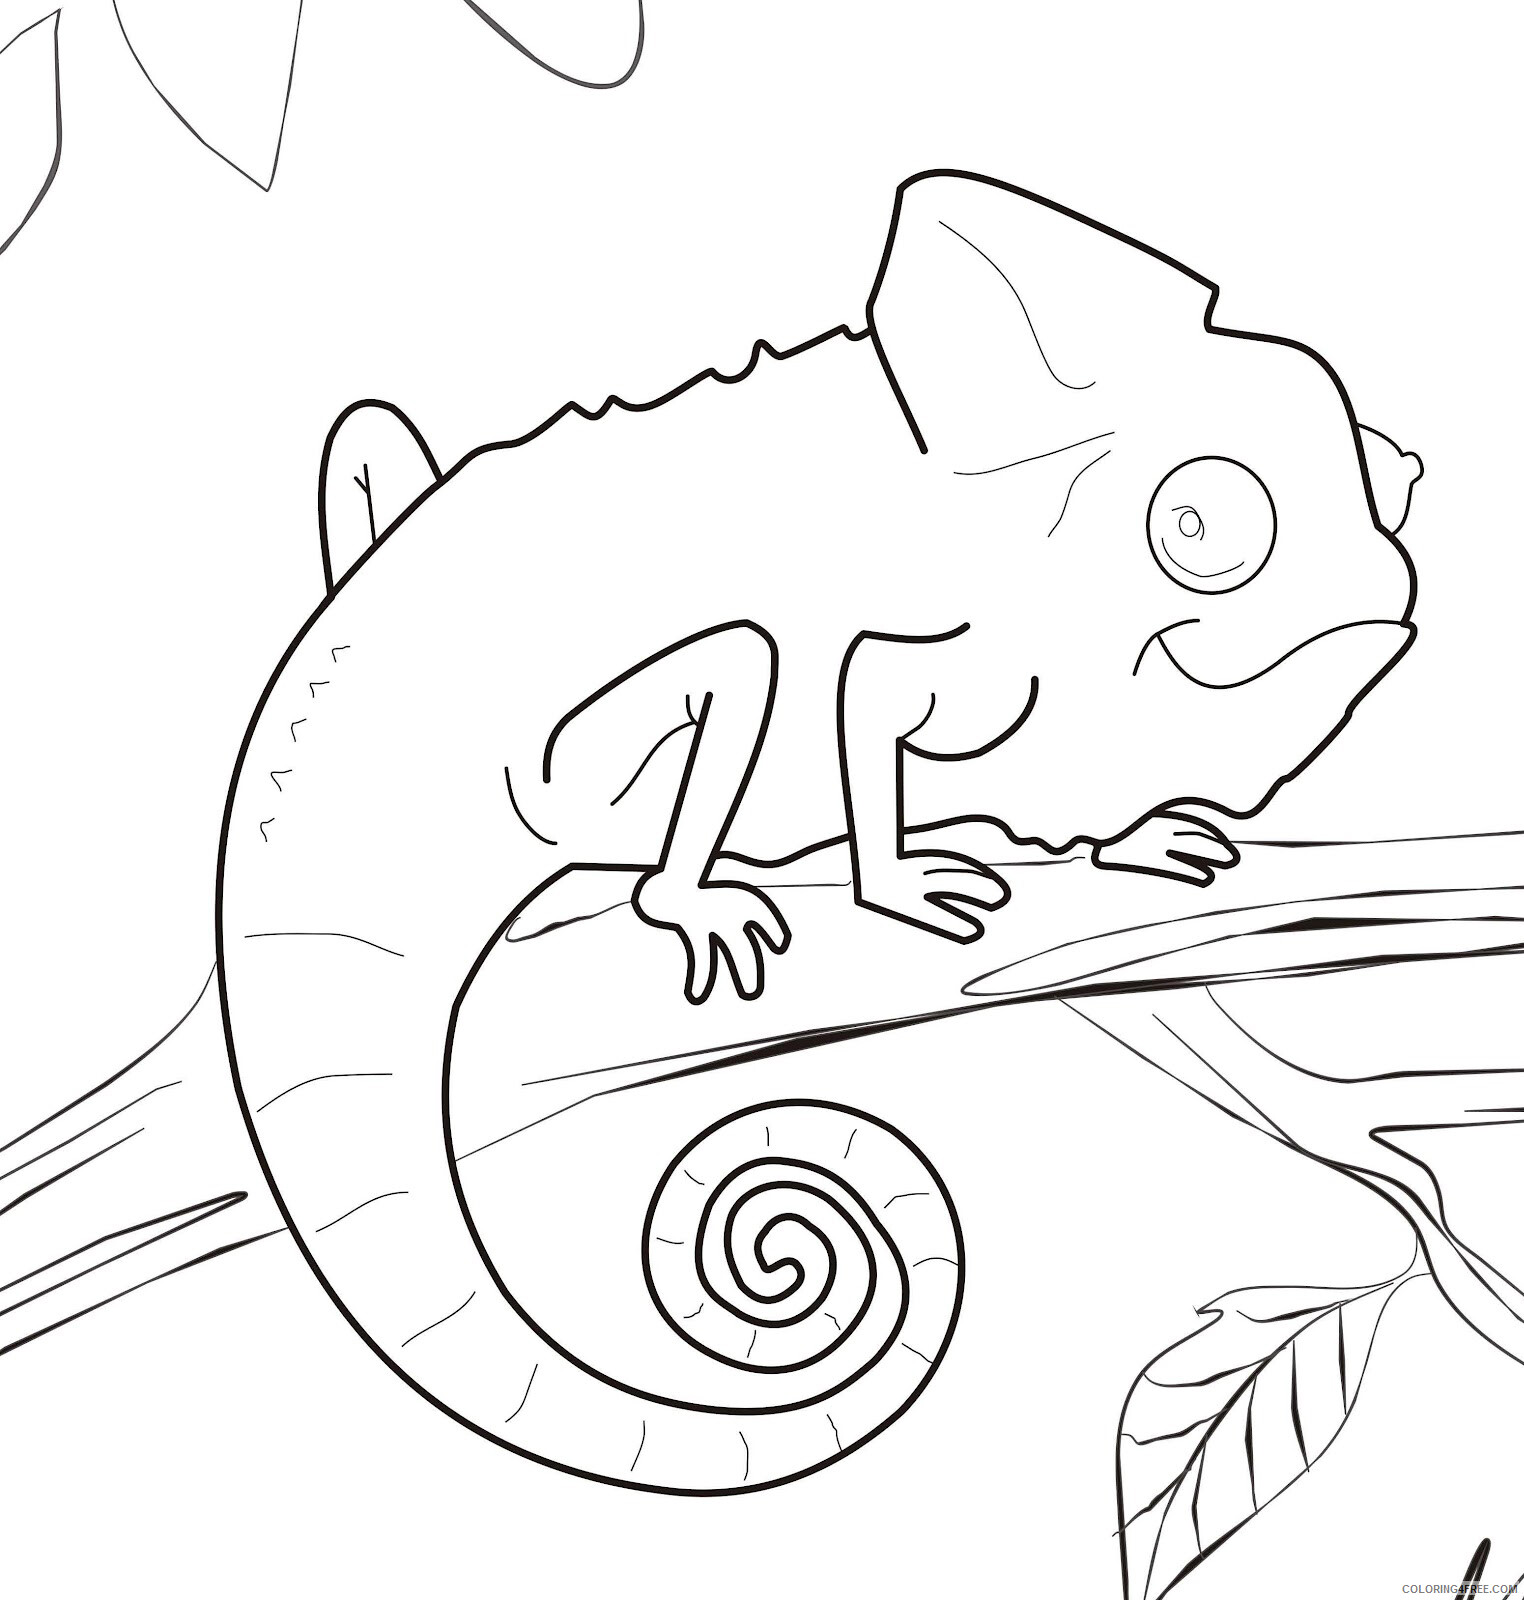 Chameleon Coloring Pages Animal Printable Sheets Chameleon 2021 0962 Coloring4free